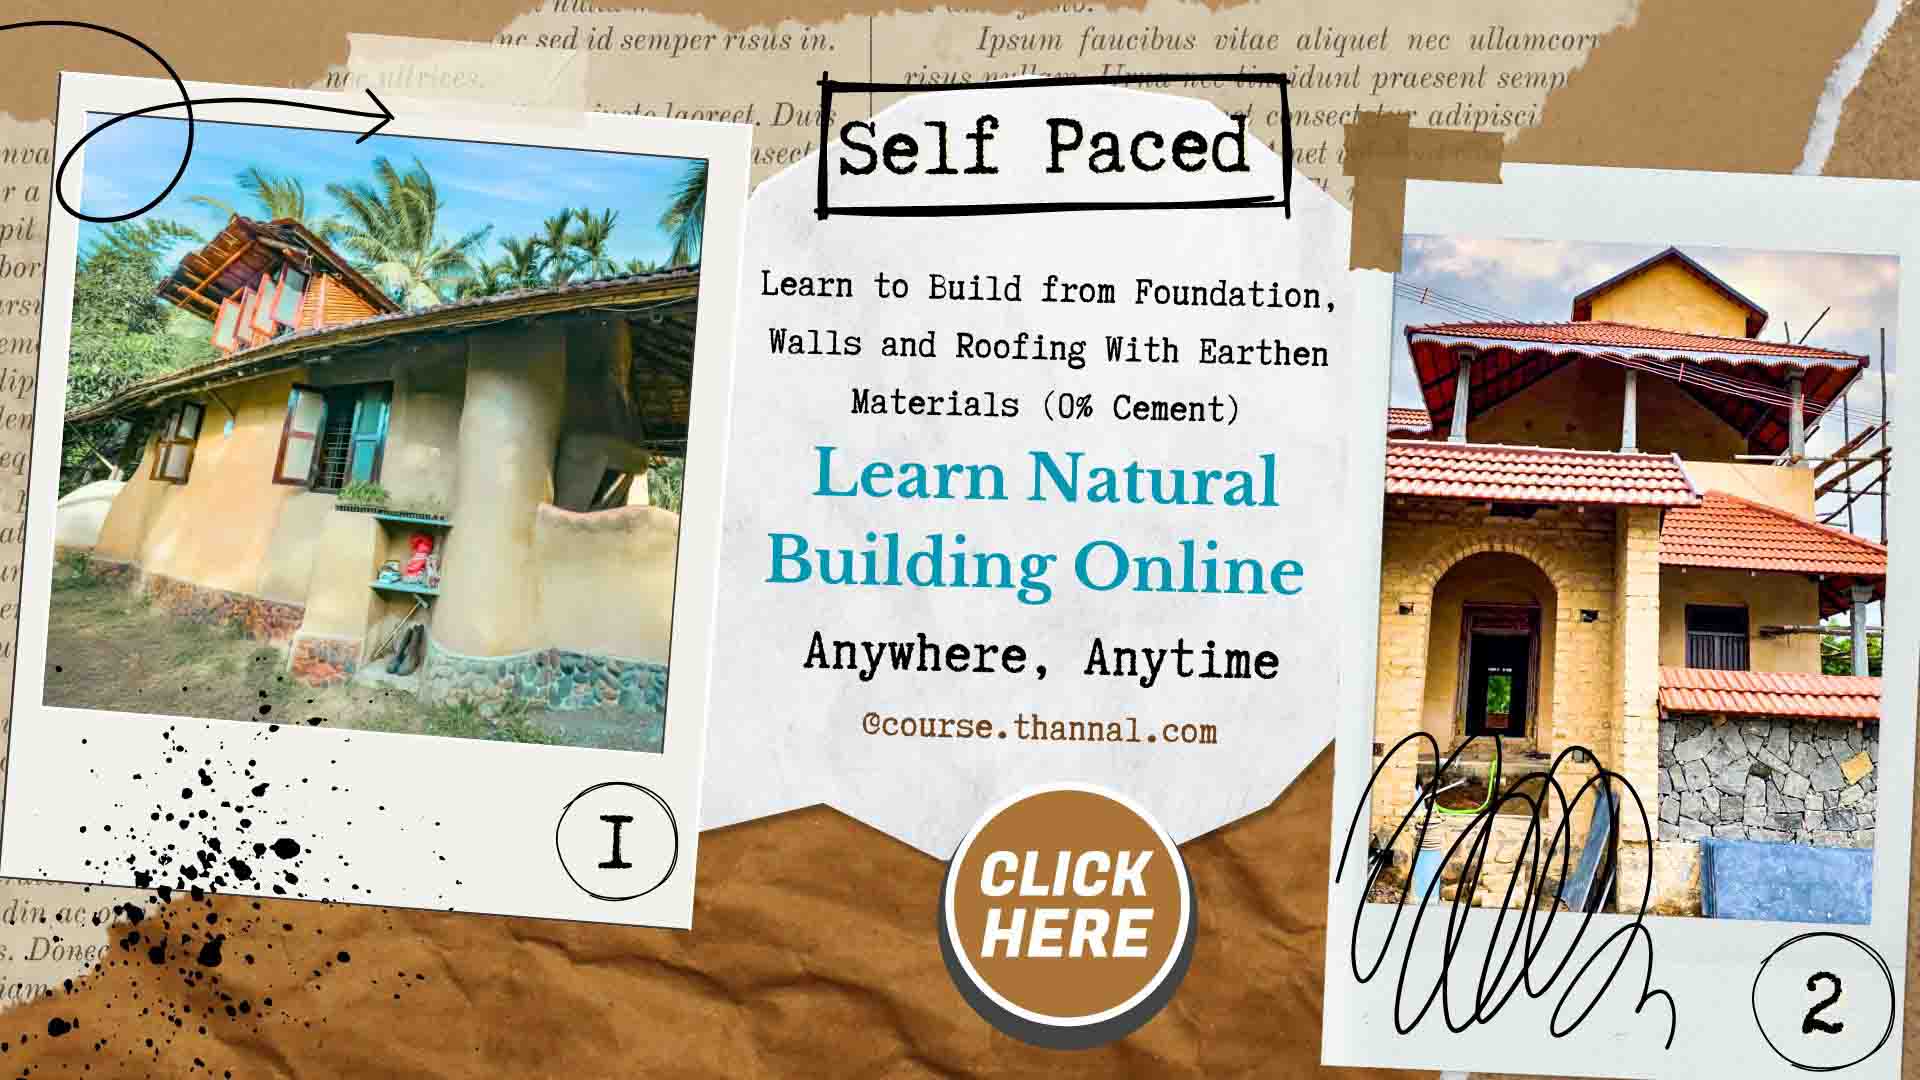 Learn natural building online selfpaced course